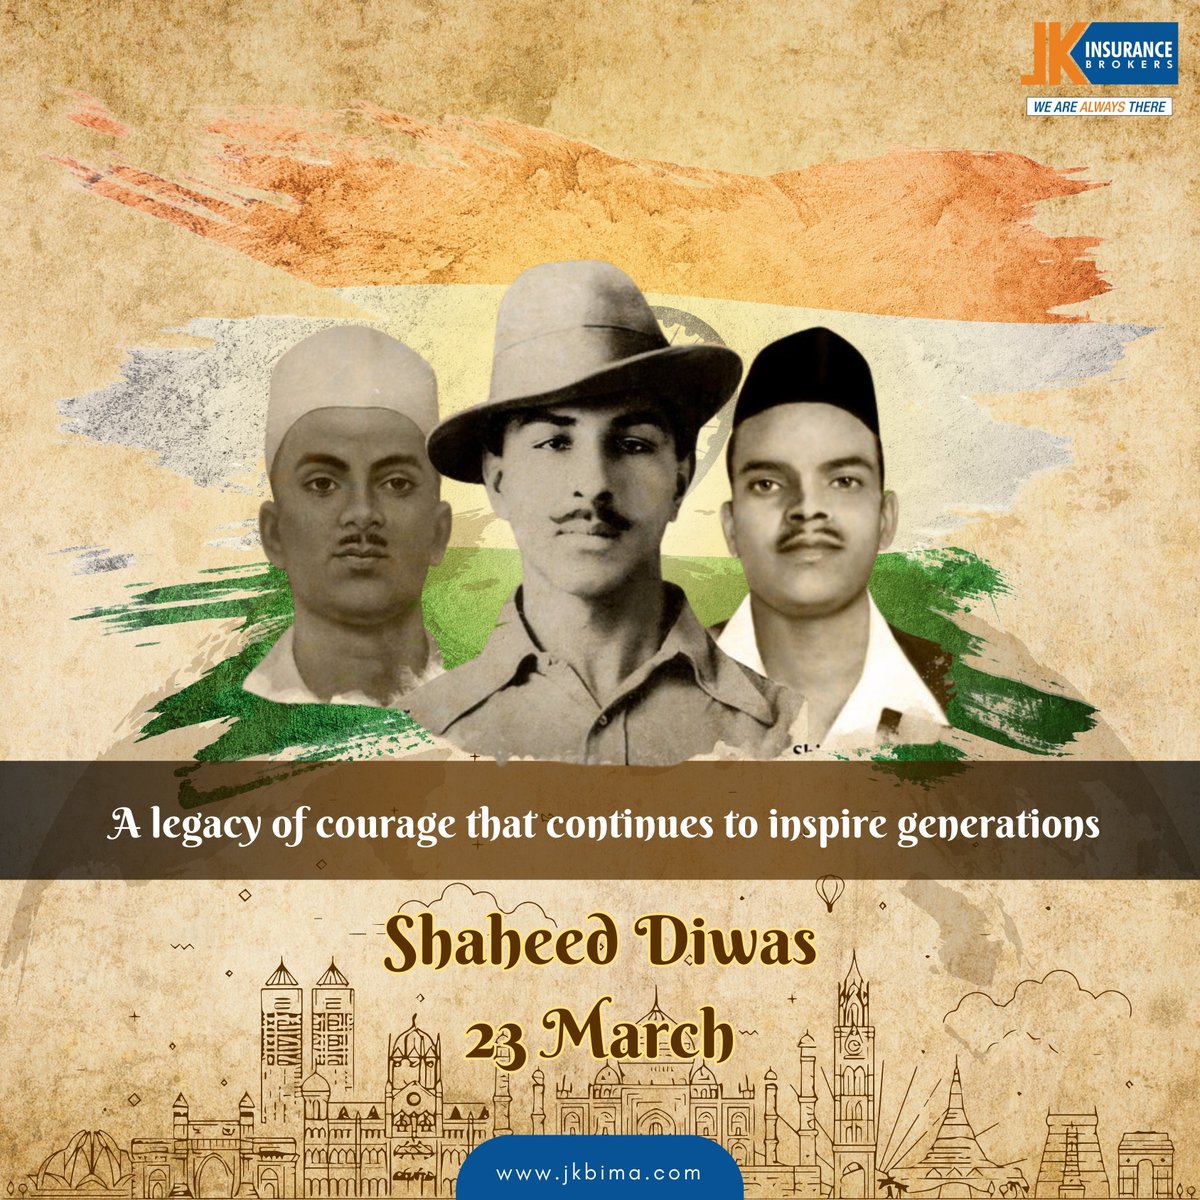 'Forever Remembered, Forever Honored: Saluting the Martyrs of Shaheed Diwas'
#JKInsuranceBrokers #CorporateInsurance #InsuranceBroker #Insurance #Martyrsday #ShaheedDiwas